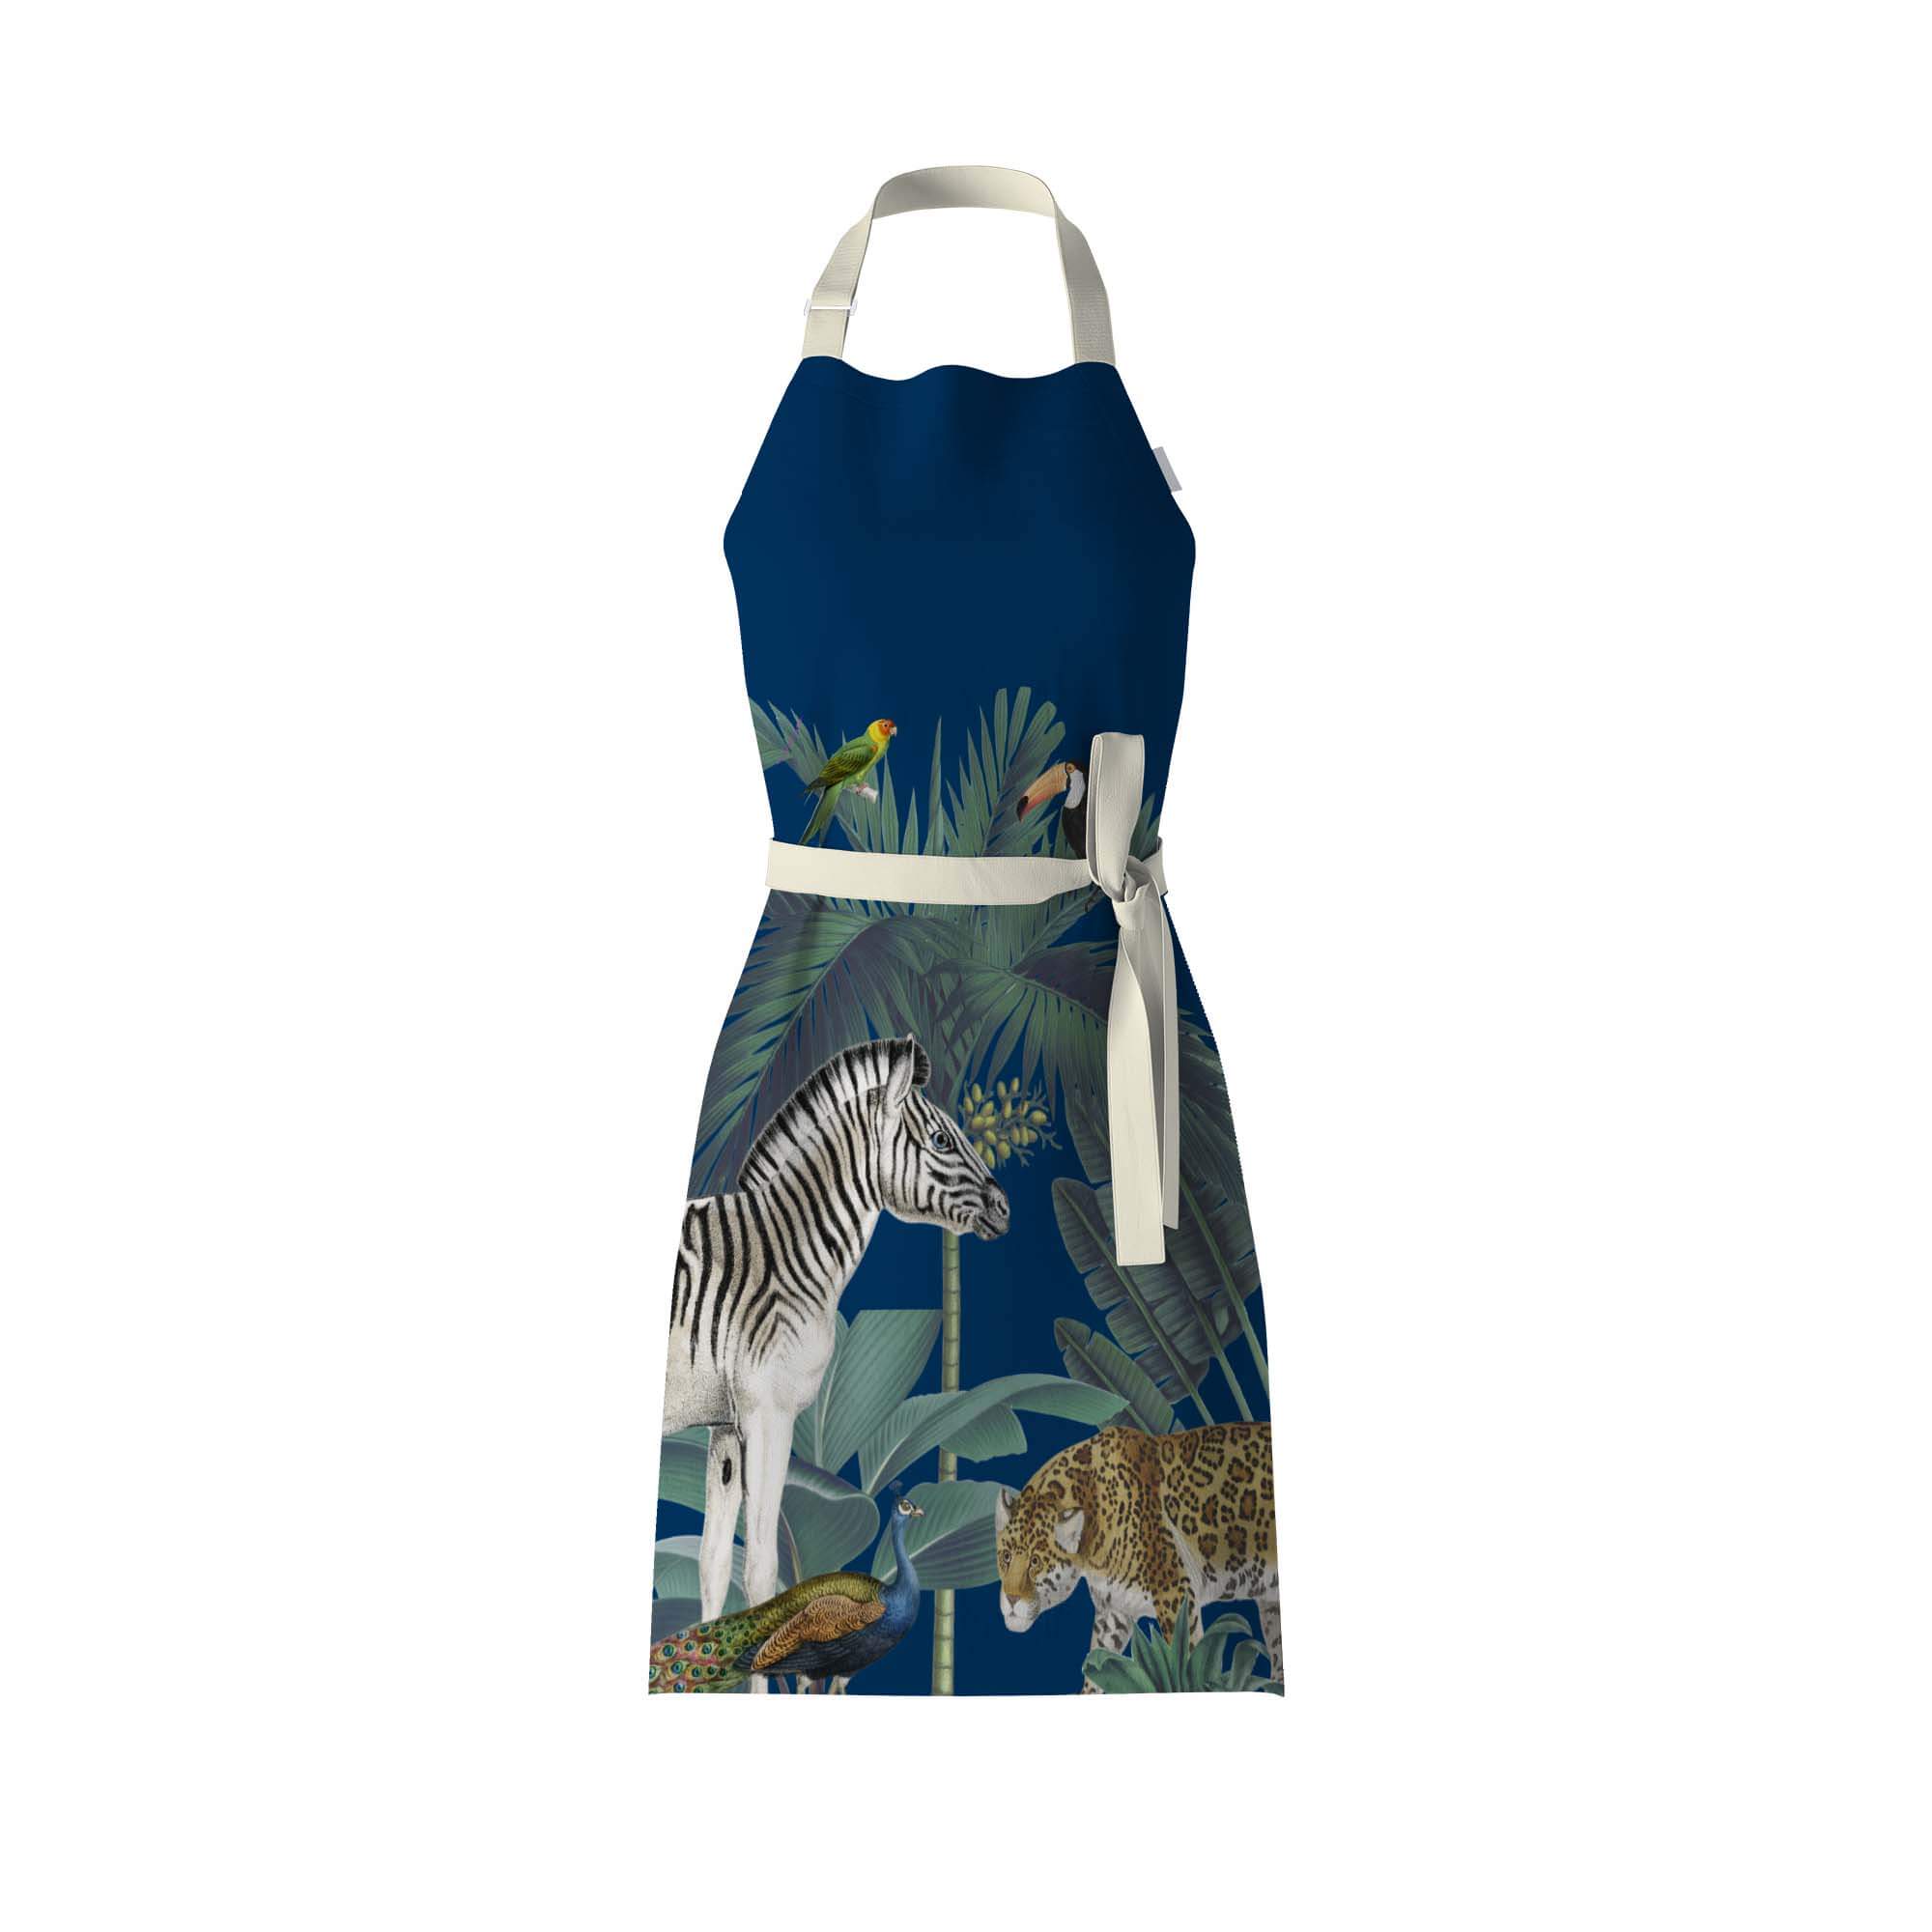 Blue Kictehn apron with Darwin's Menagerie scene including zebra, leopard, peacock and palms on bib apron from mustard and gray with contrasting neck and wasit ties